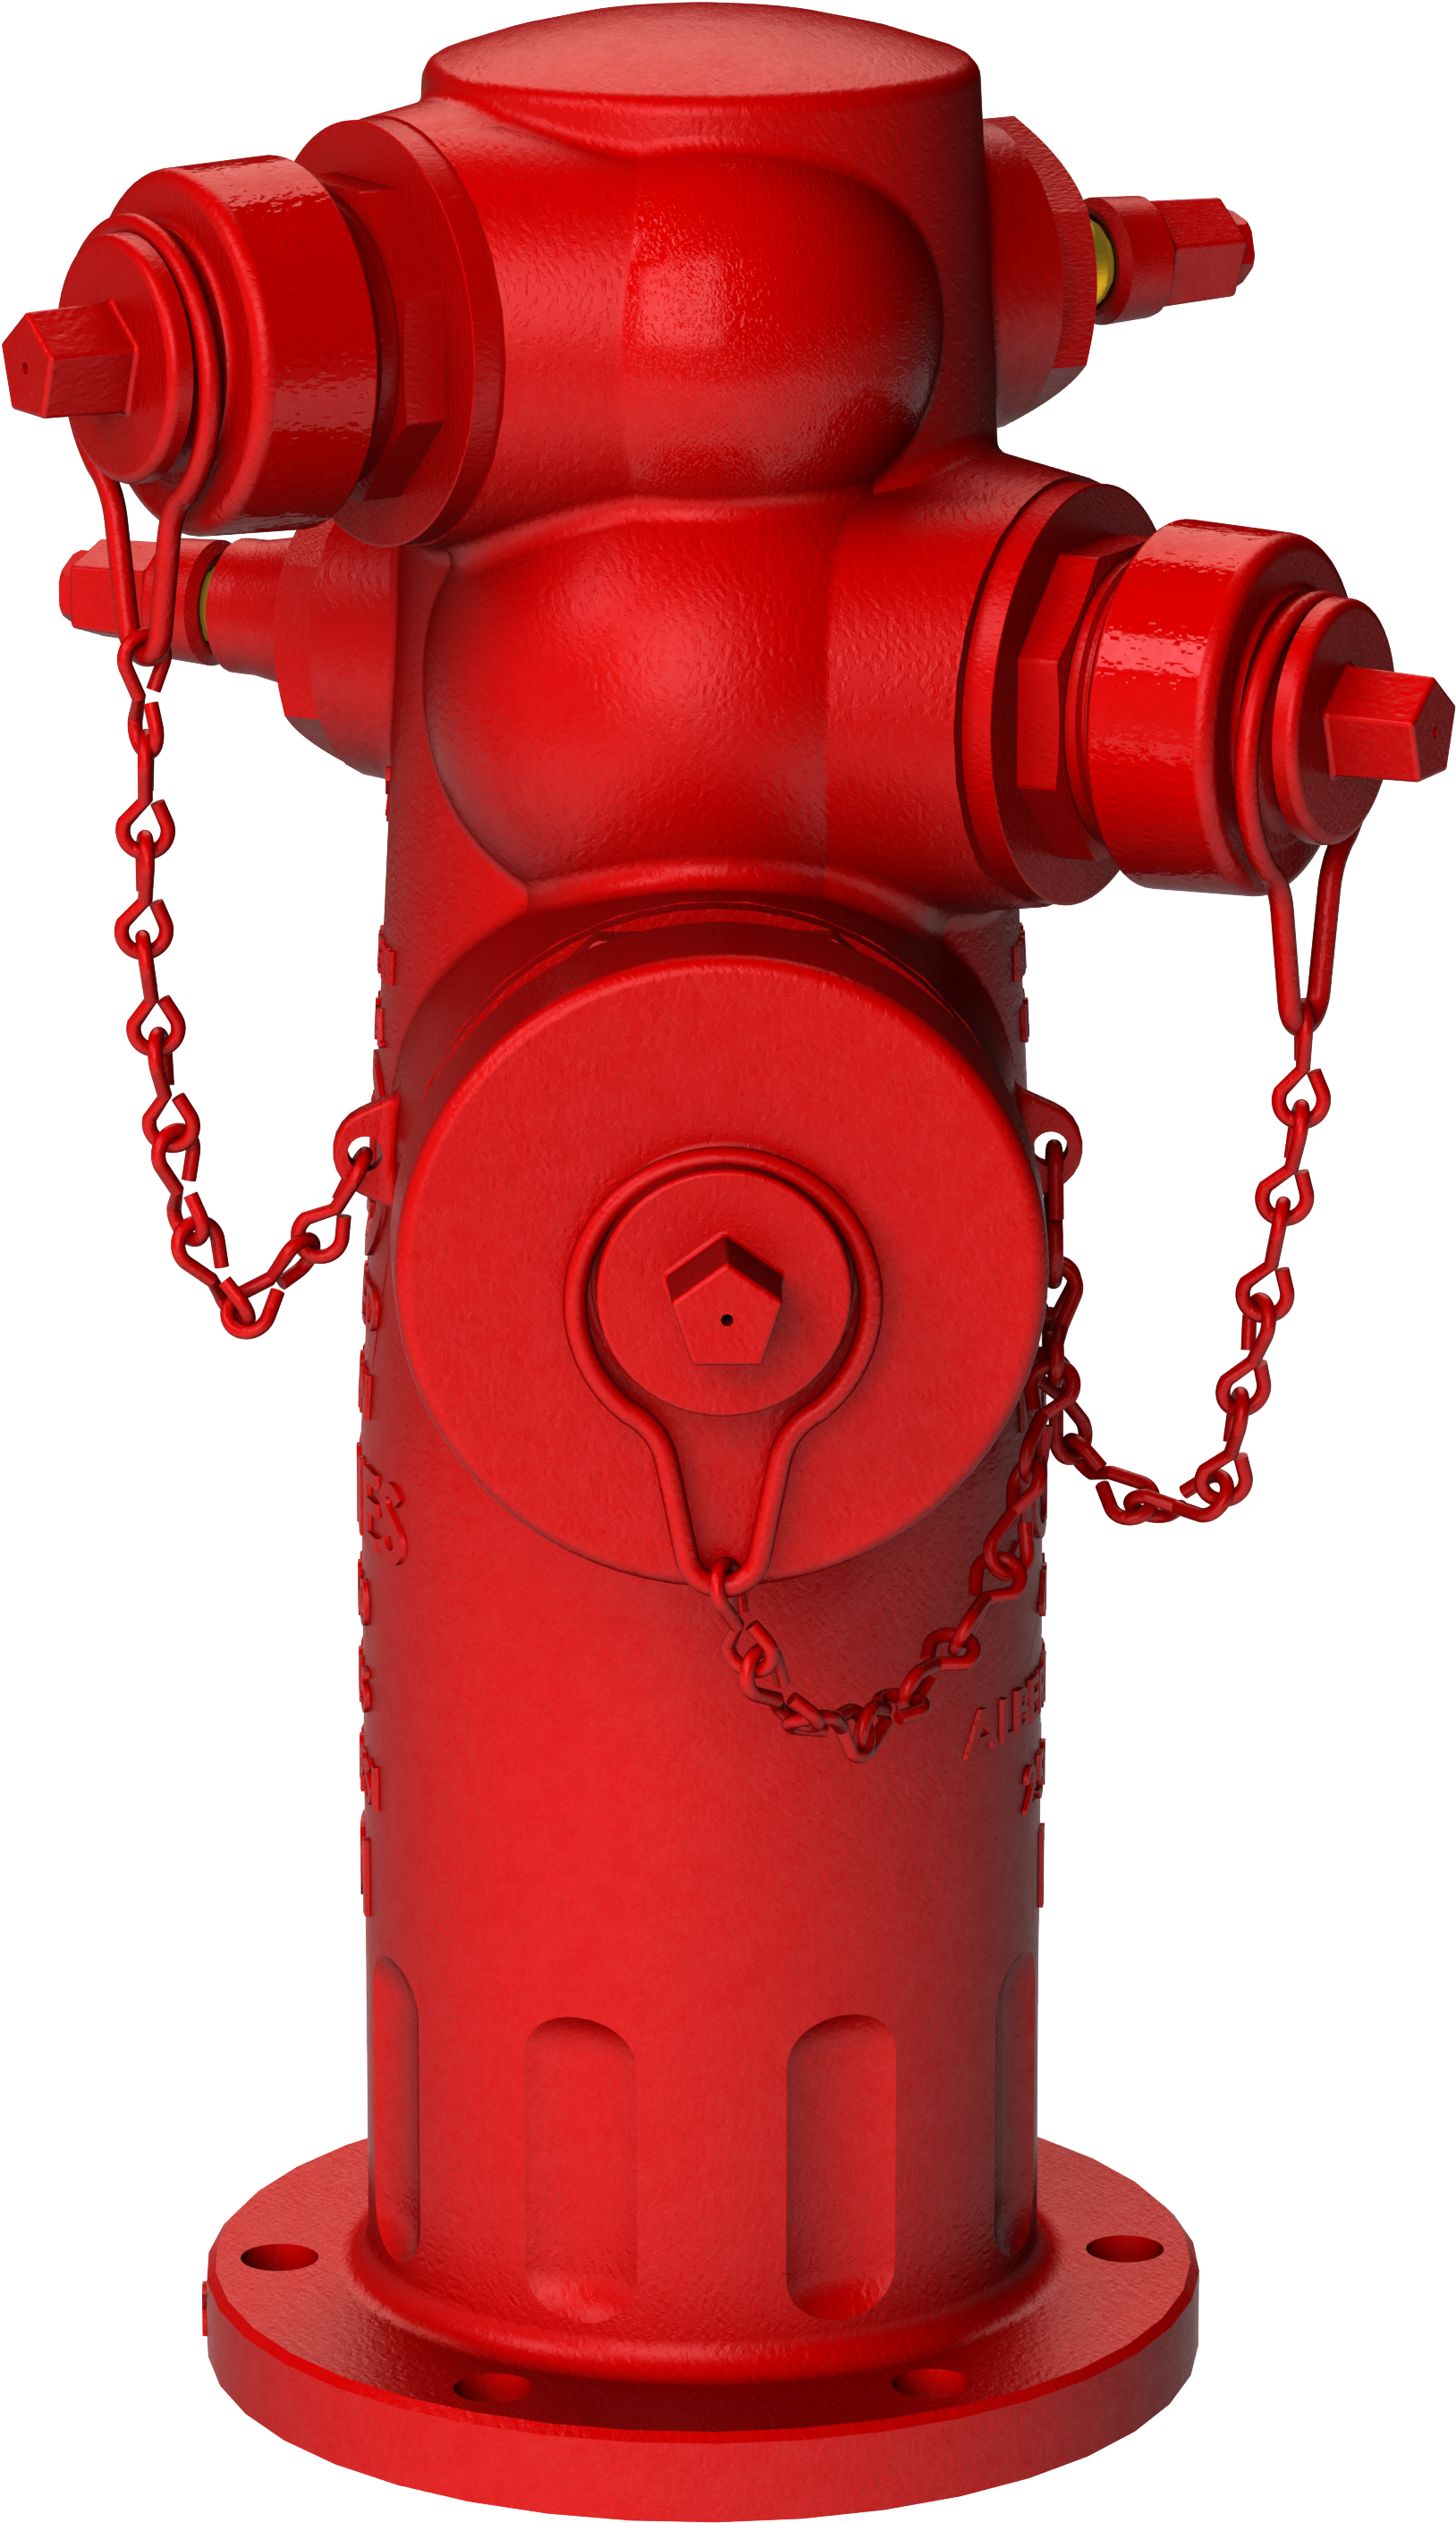 Download - Fire Hydrant Transparent (2250x3000)